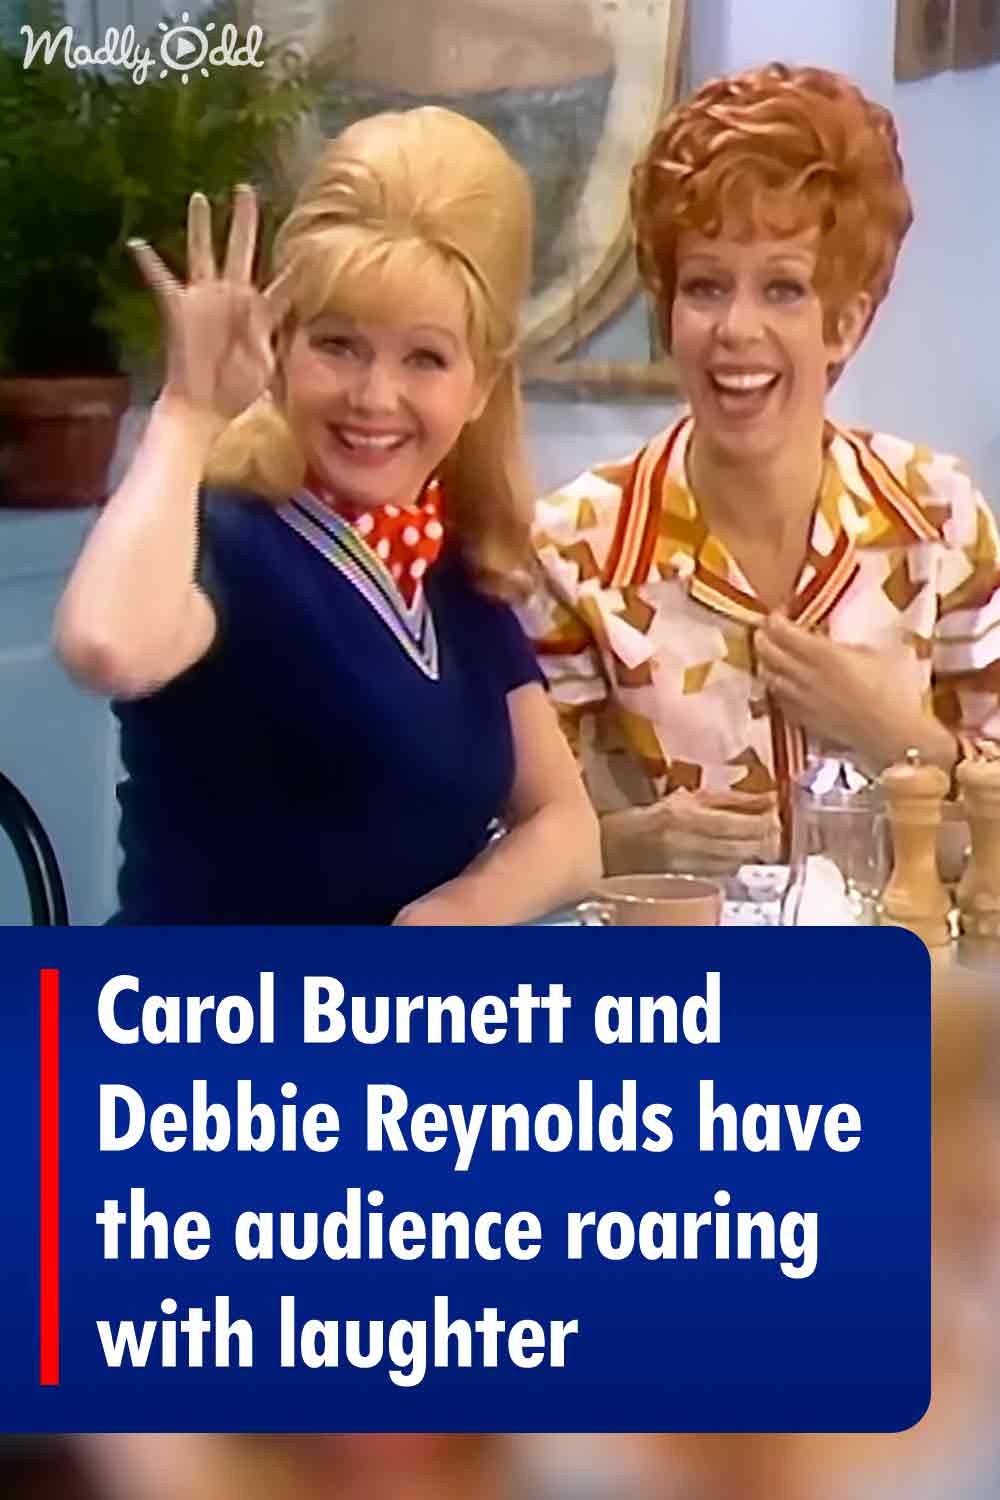 Carol Burnett and Debbie Reynolds have the audience roaring with laughter